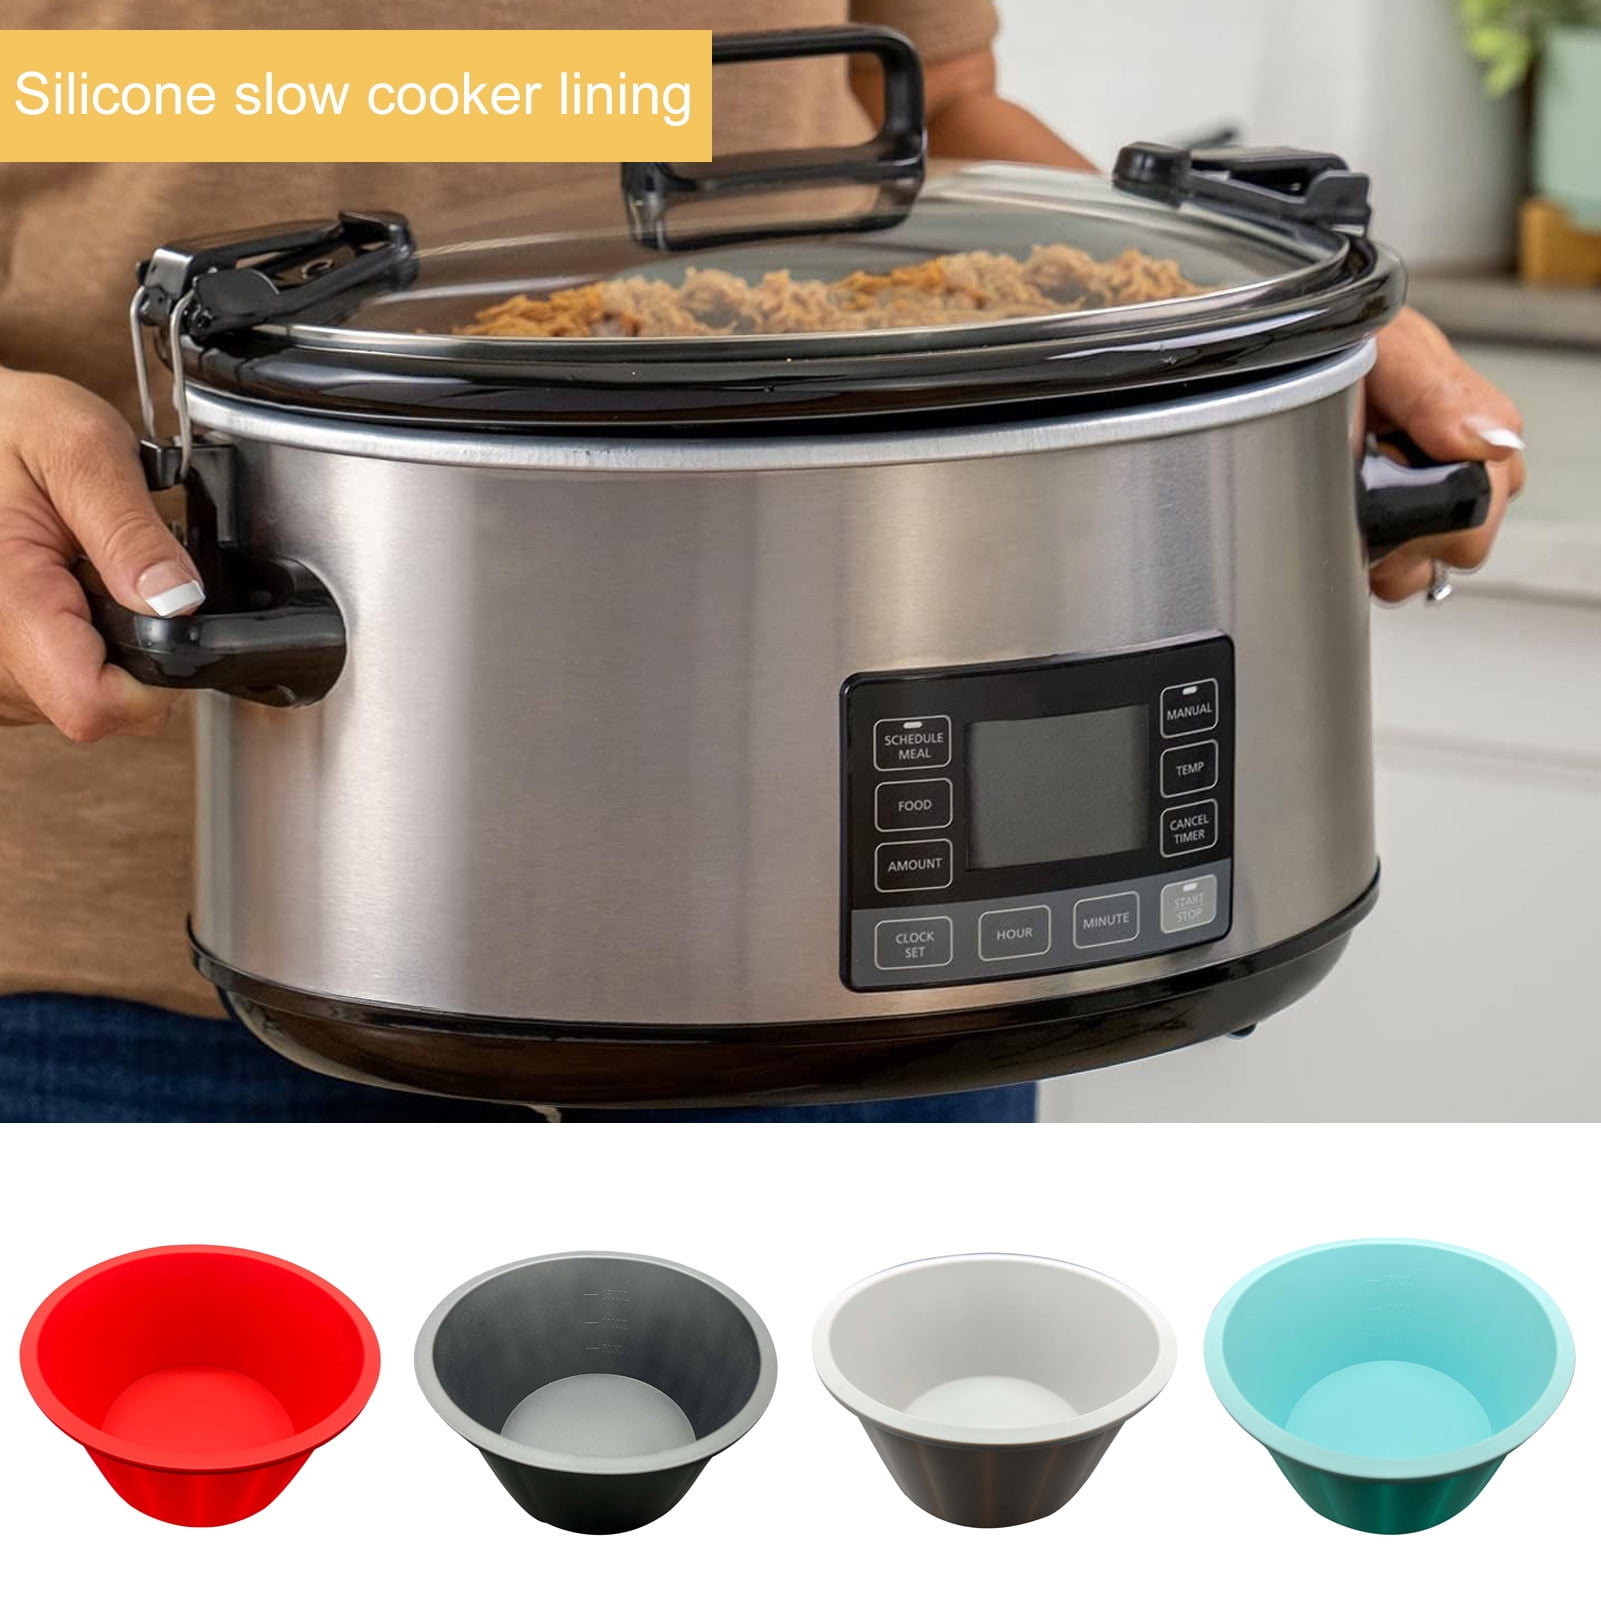 OathHaven Silicone Crock Pot Liners Large Size w/Tongs | Single Reusable Silicone Slow Cooker Liner | Flexible Slow Cooker Liners 3-8 Quart Pots | Easy Clean